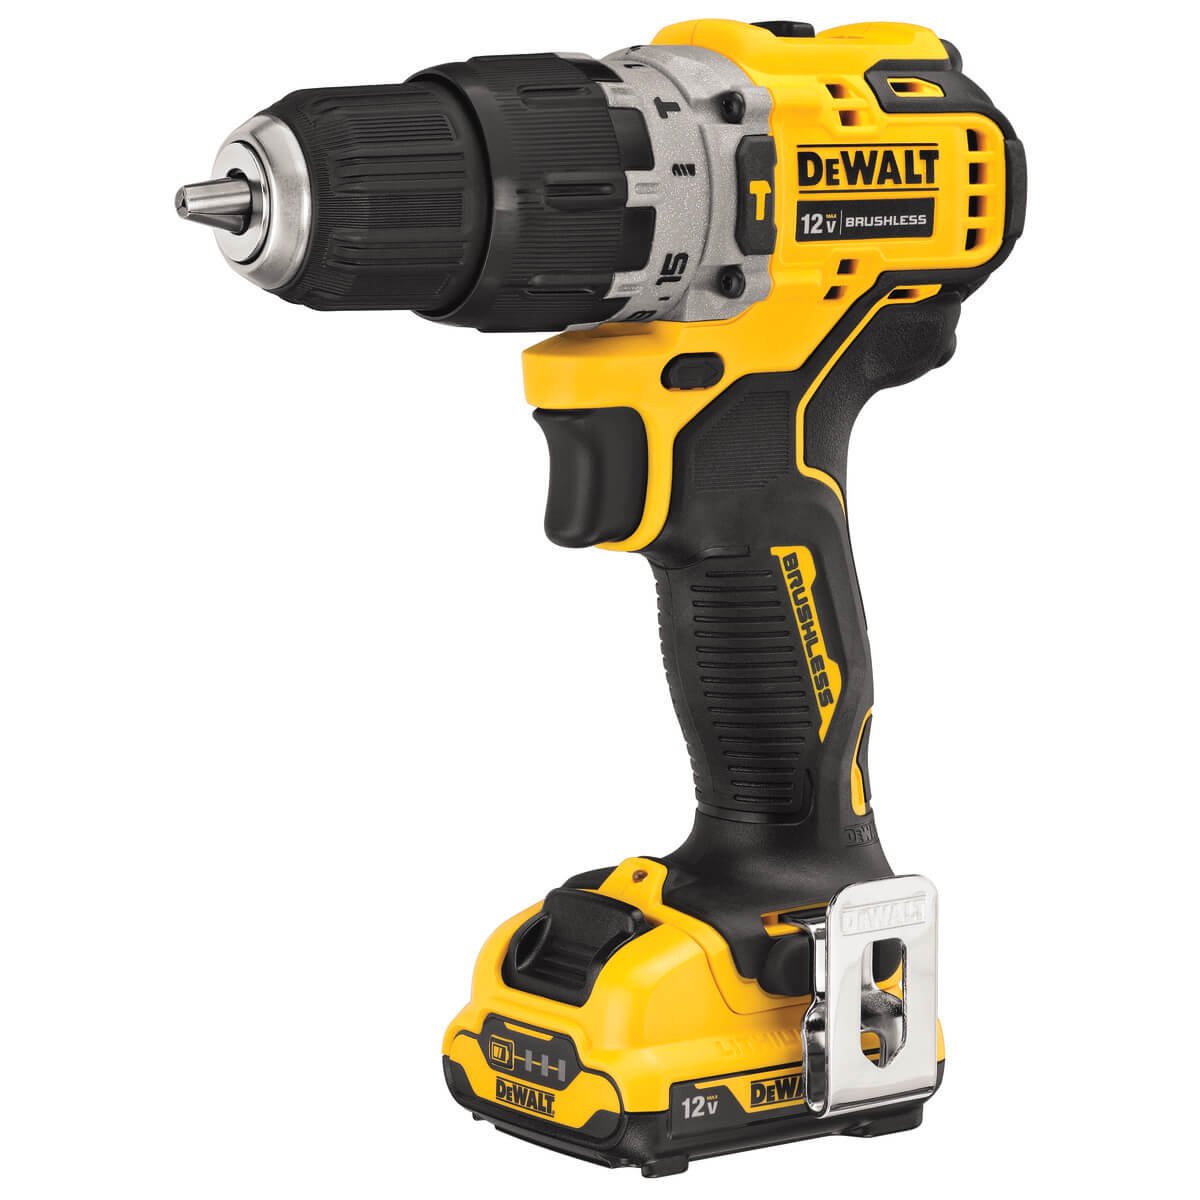 DEWALT DCD706B XTREME™ 12V MAX* BRUSHLESS 3/8 IN. CORDLESS HAMMER DRILL (TOOL ONLY)